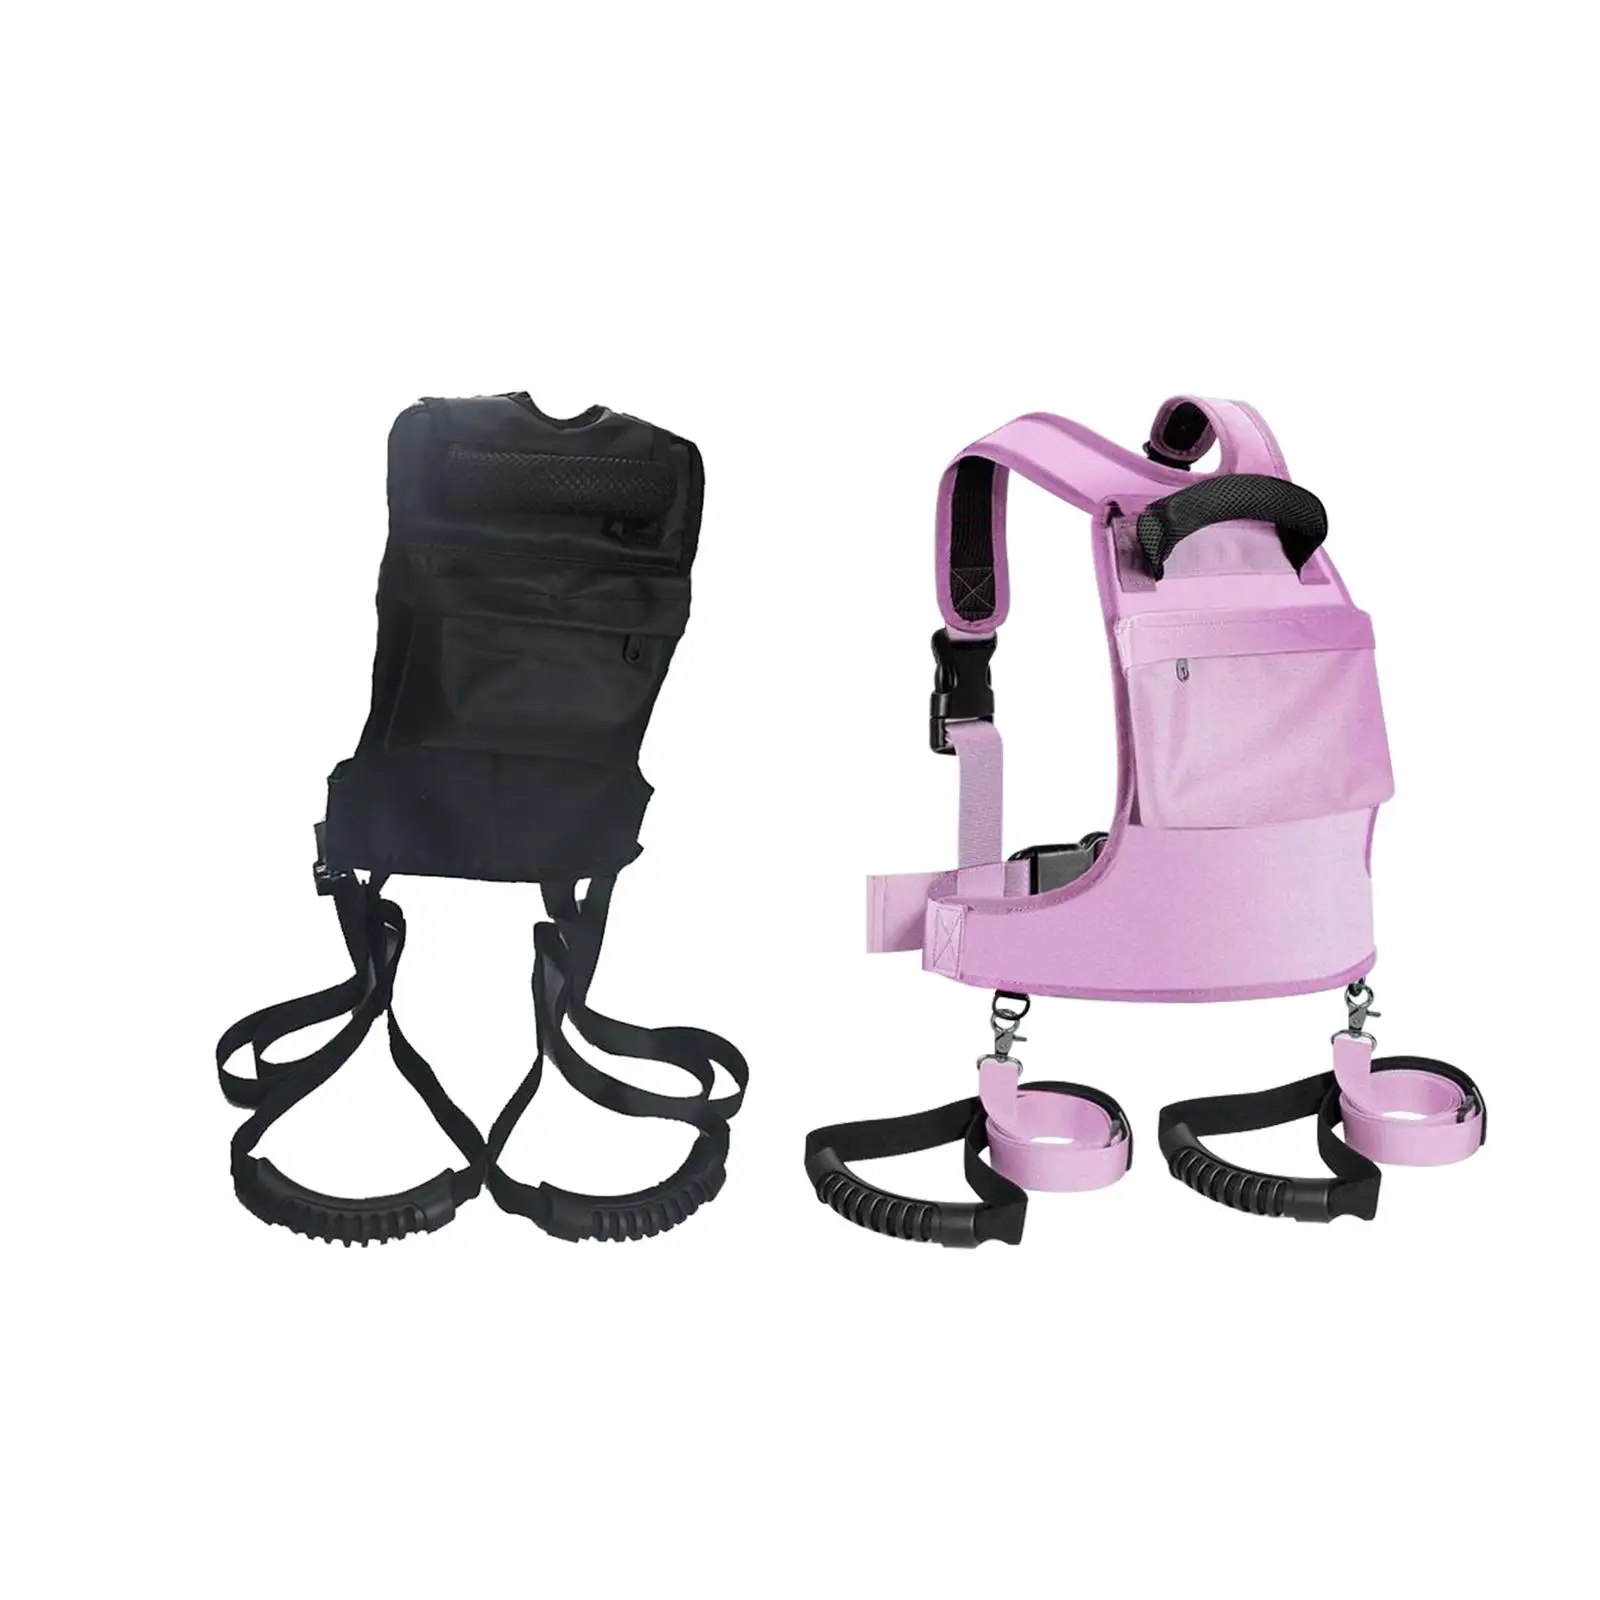 Kids Ski and Snowboard Harness Max Load 60lbs Speed Control 2-8 Years Old Girls Boys